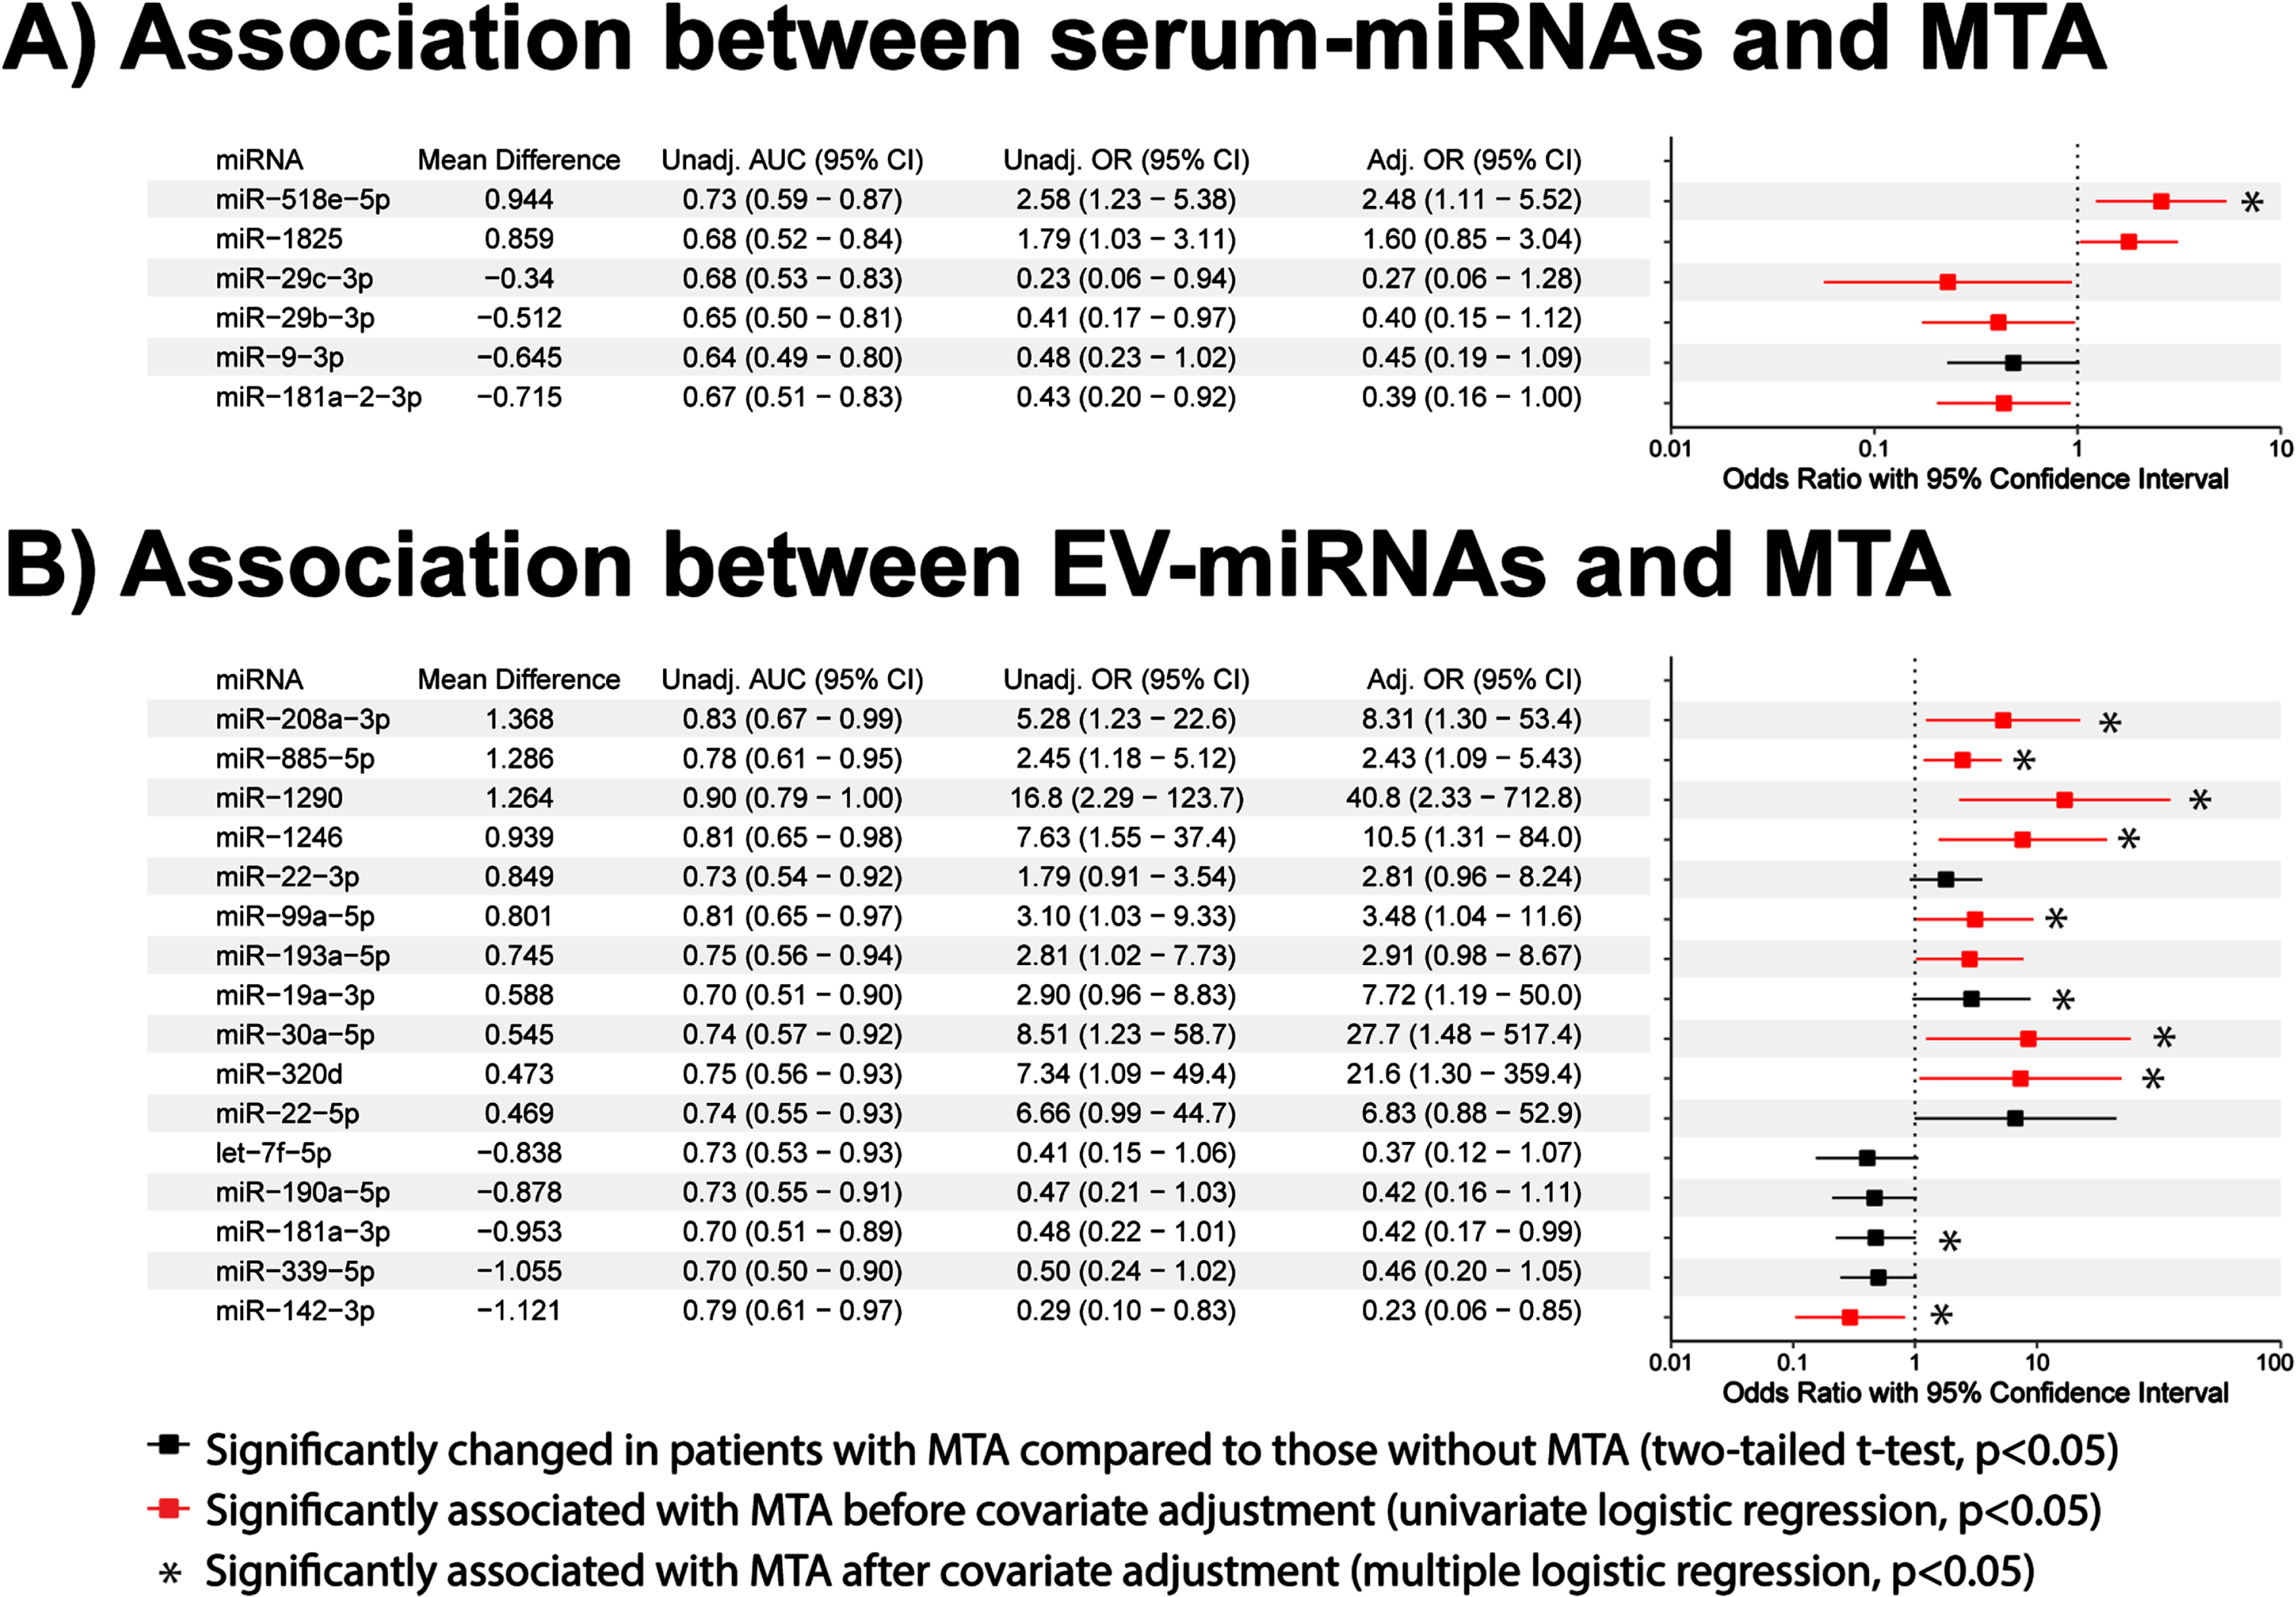 Associations of serum and EV miRNAs with medial temporal atrophy. Univariate and multiple regression analyses of (A) 6 serum-miRNAs and (B) 16 EV-miRNAs significantly altered in medial temporal atrophy cases. Associations are expressed in terms of odds ratios (OR) and their 95% confidence intervals (CI). Red lines indicate significant association before covariate adjustment (p < 0.05, univariate binary logistic regression), while asterisks indicate significant association after covariate adjustment for age, gender, education, and APOE ɛ4 (p < 0.05, multiple binary logistic regression).